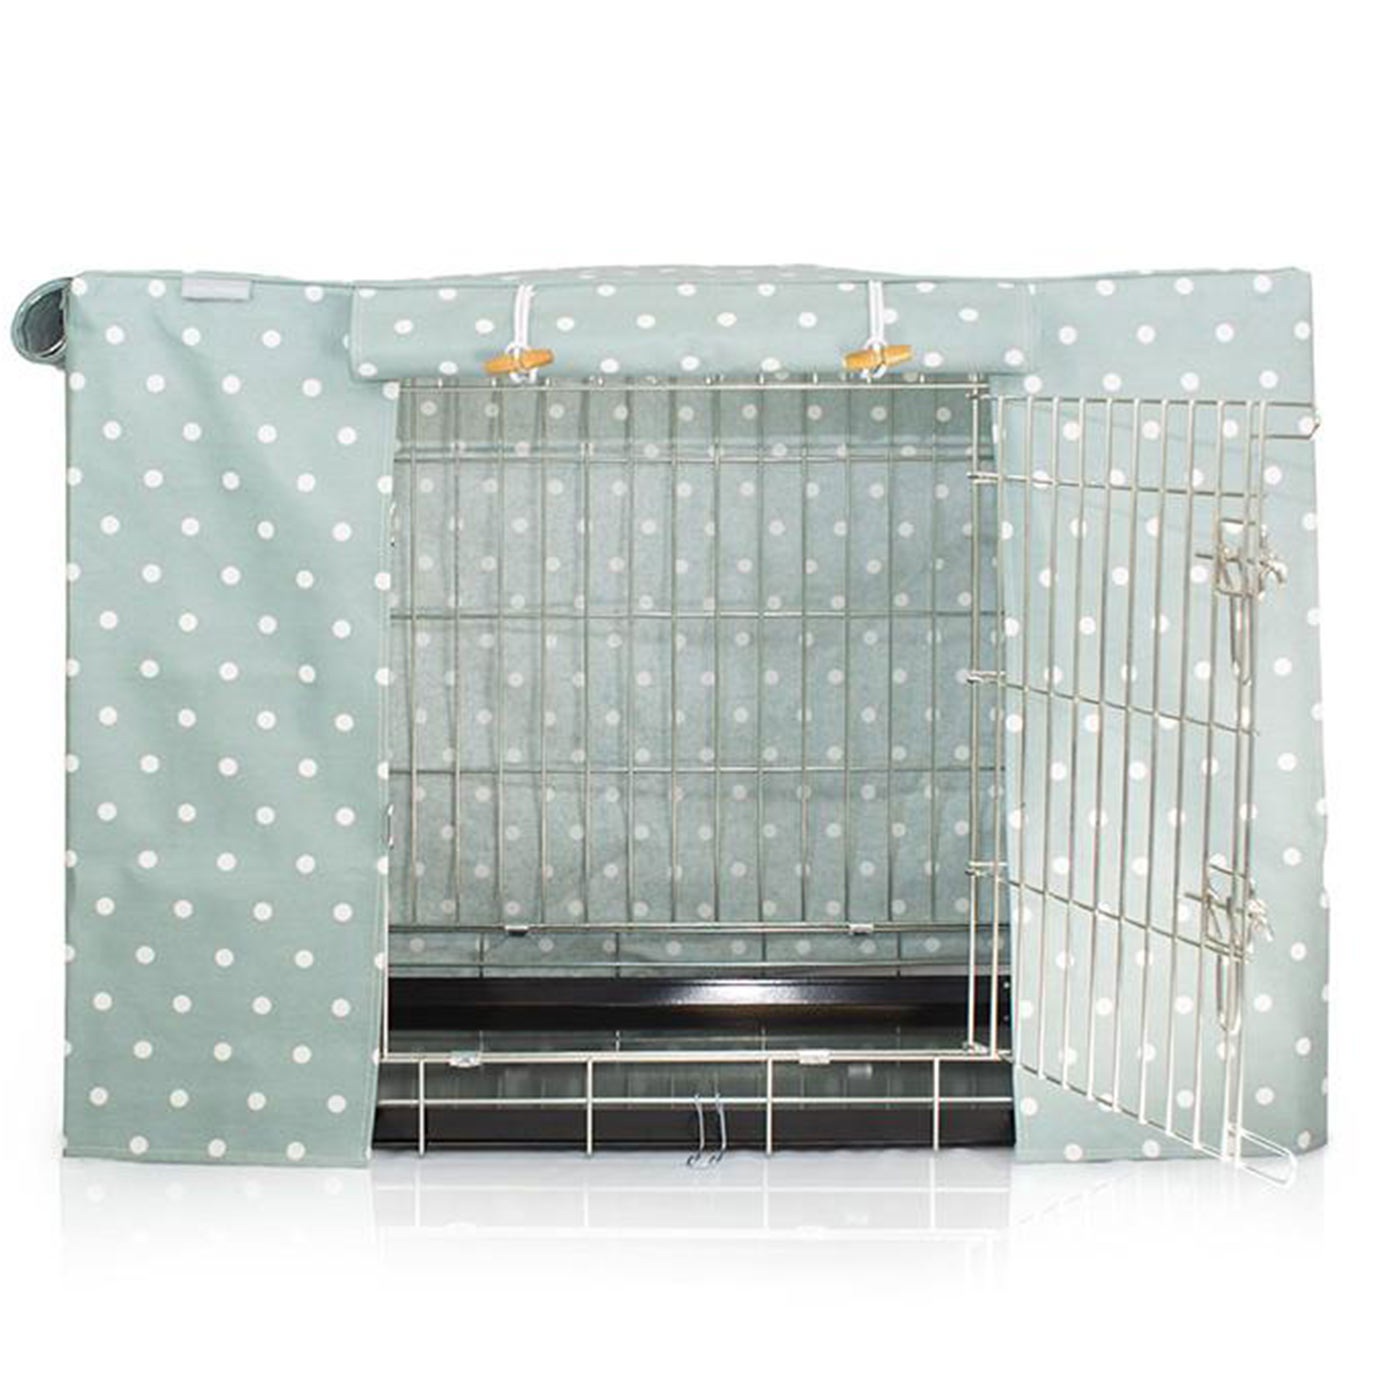 Discover Our Heavy-Duty Dog Crate With Duck Egg Spot Oil Cloth Crate Cover! The Perfect Crate Accessory For The Ultimate Pet Den at Lords & Labradors 